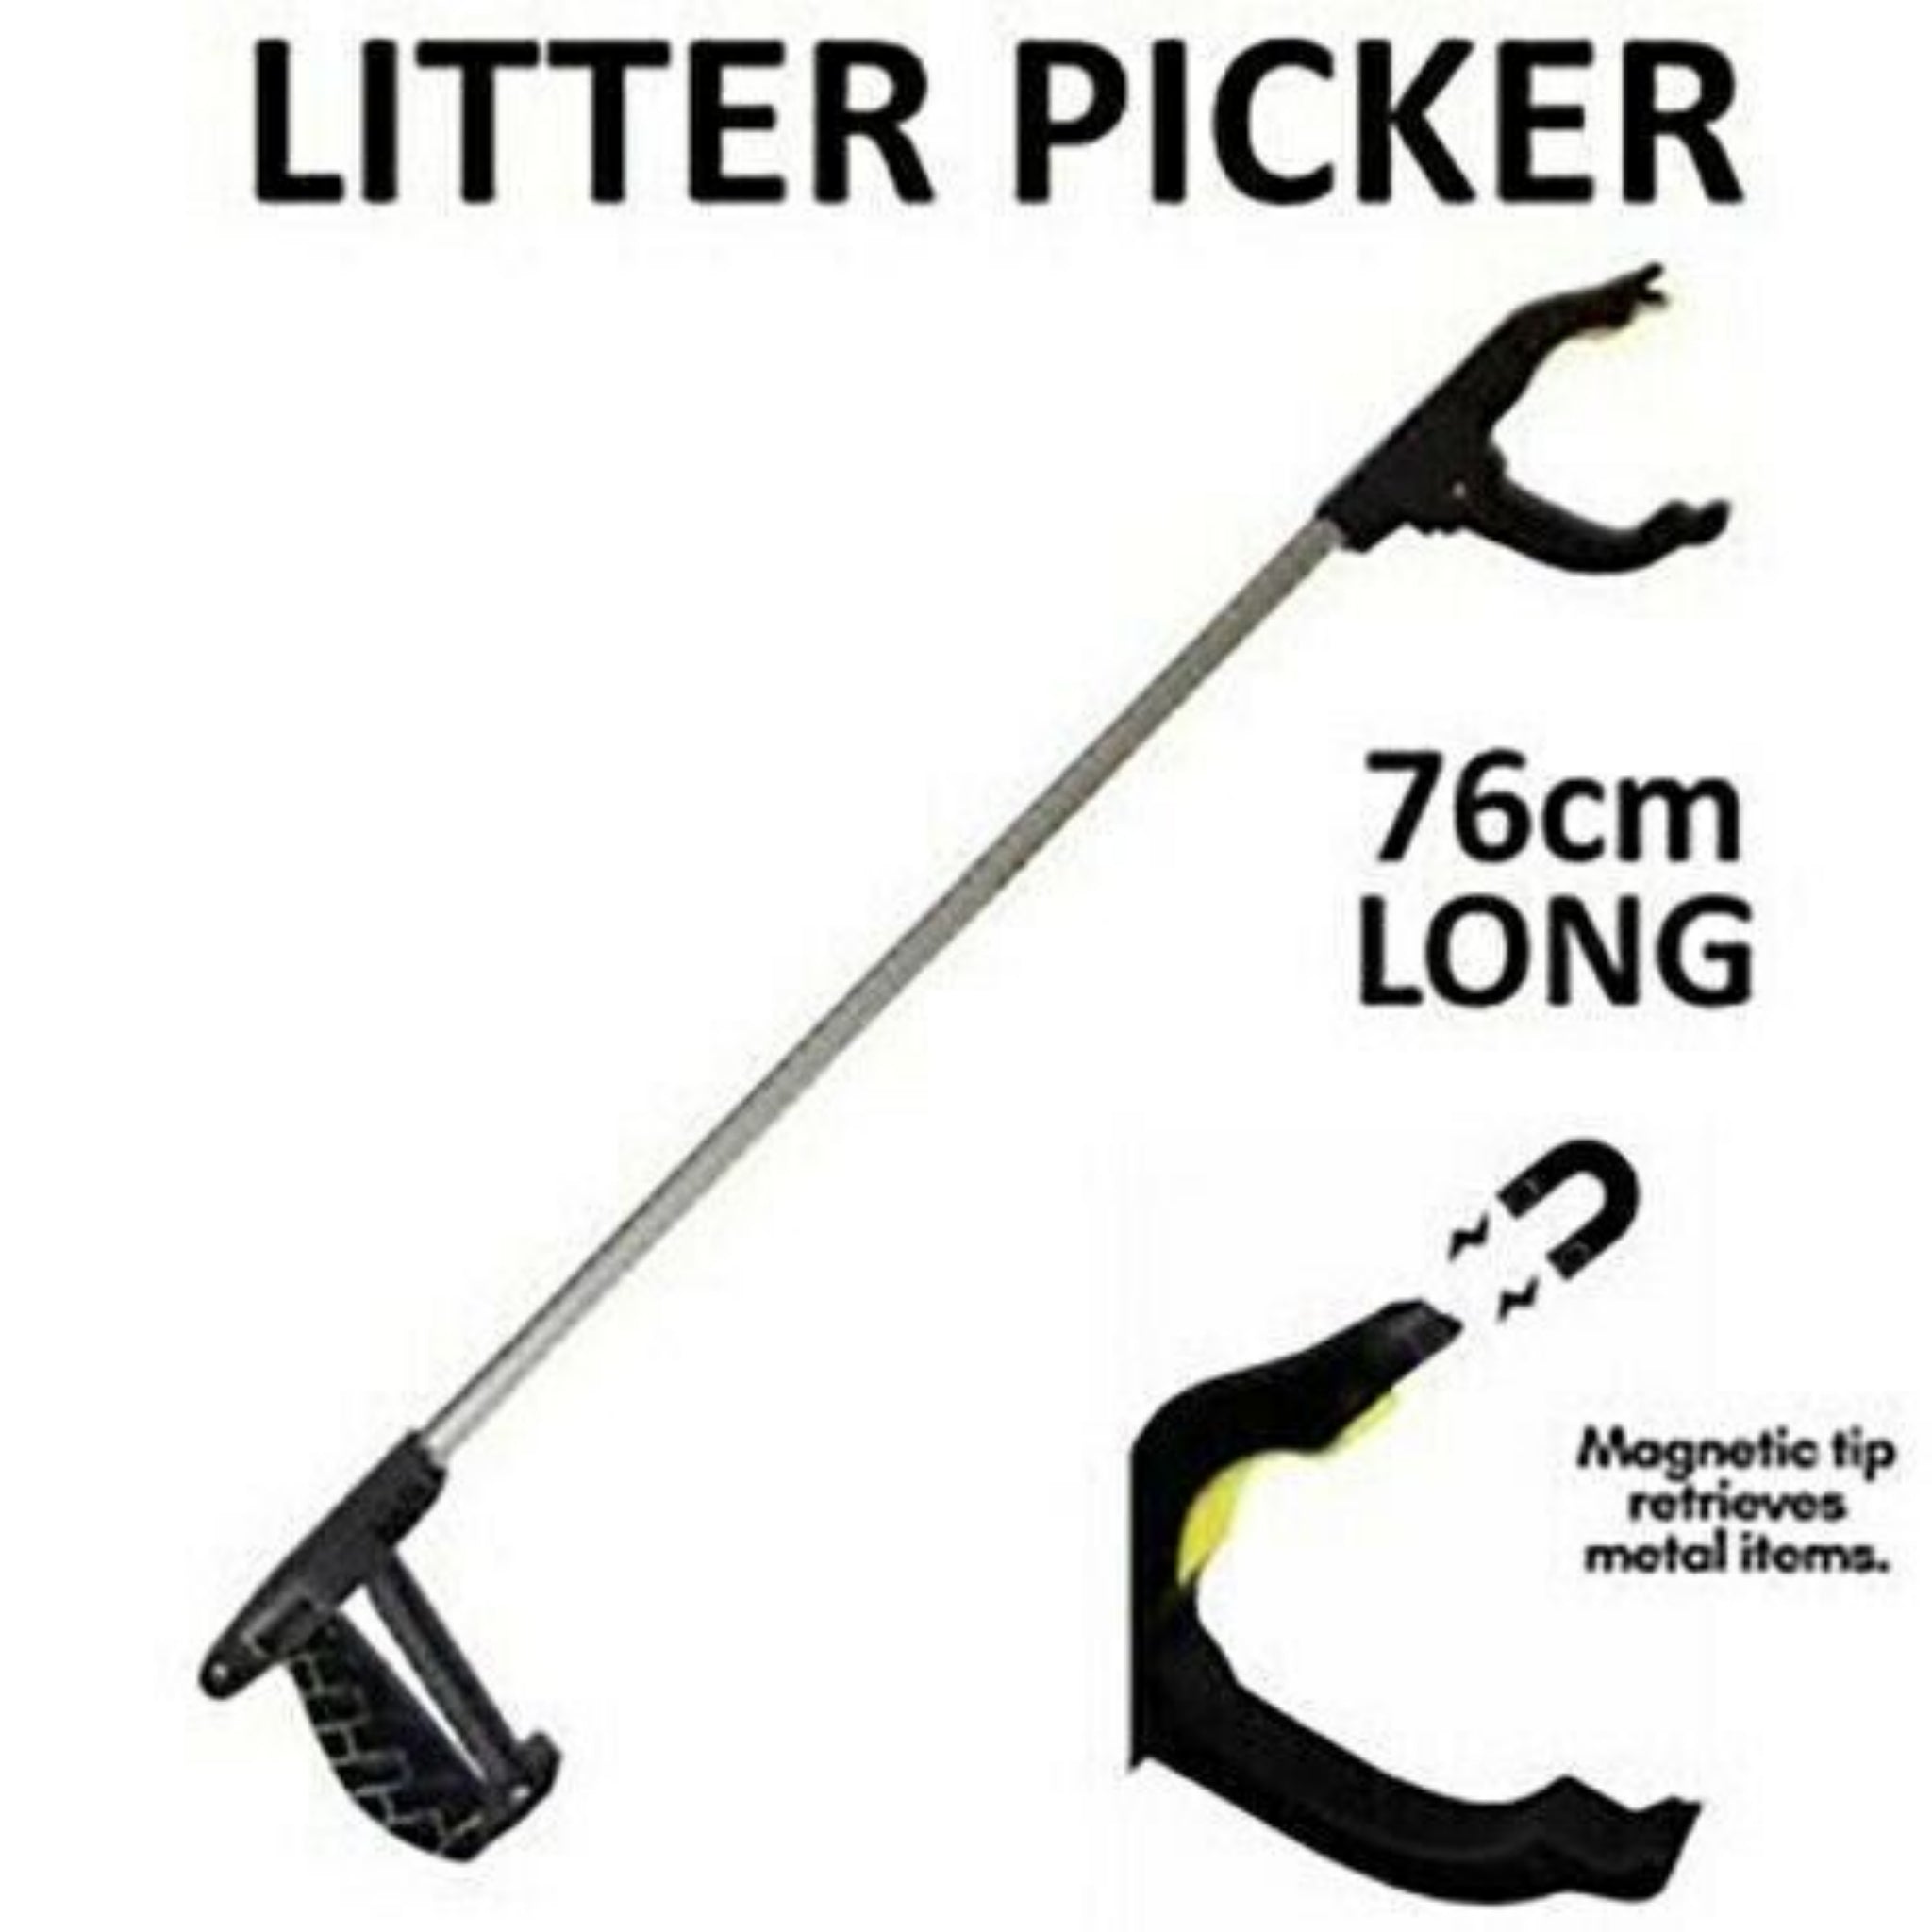 Beclen Harp 2pc 75cm Magnetic Tip Reacher Litter/Rubbish Picker/Grabber Mobility Tool-Perfect Helping Hand For Indoor And Outdoor Garbage Pick Up